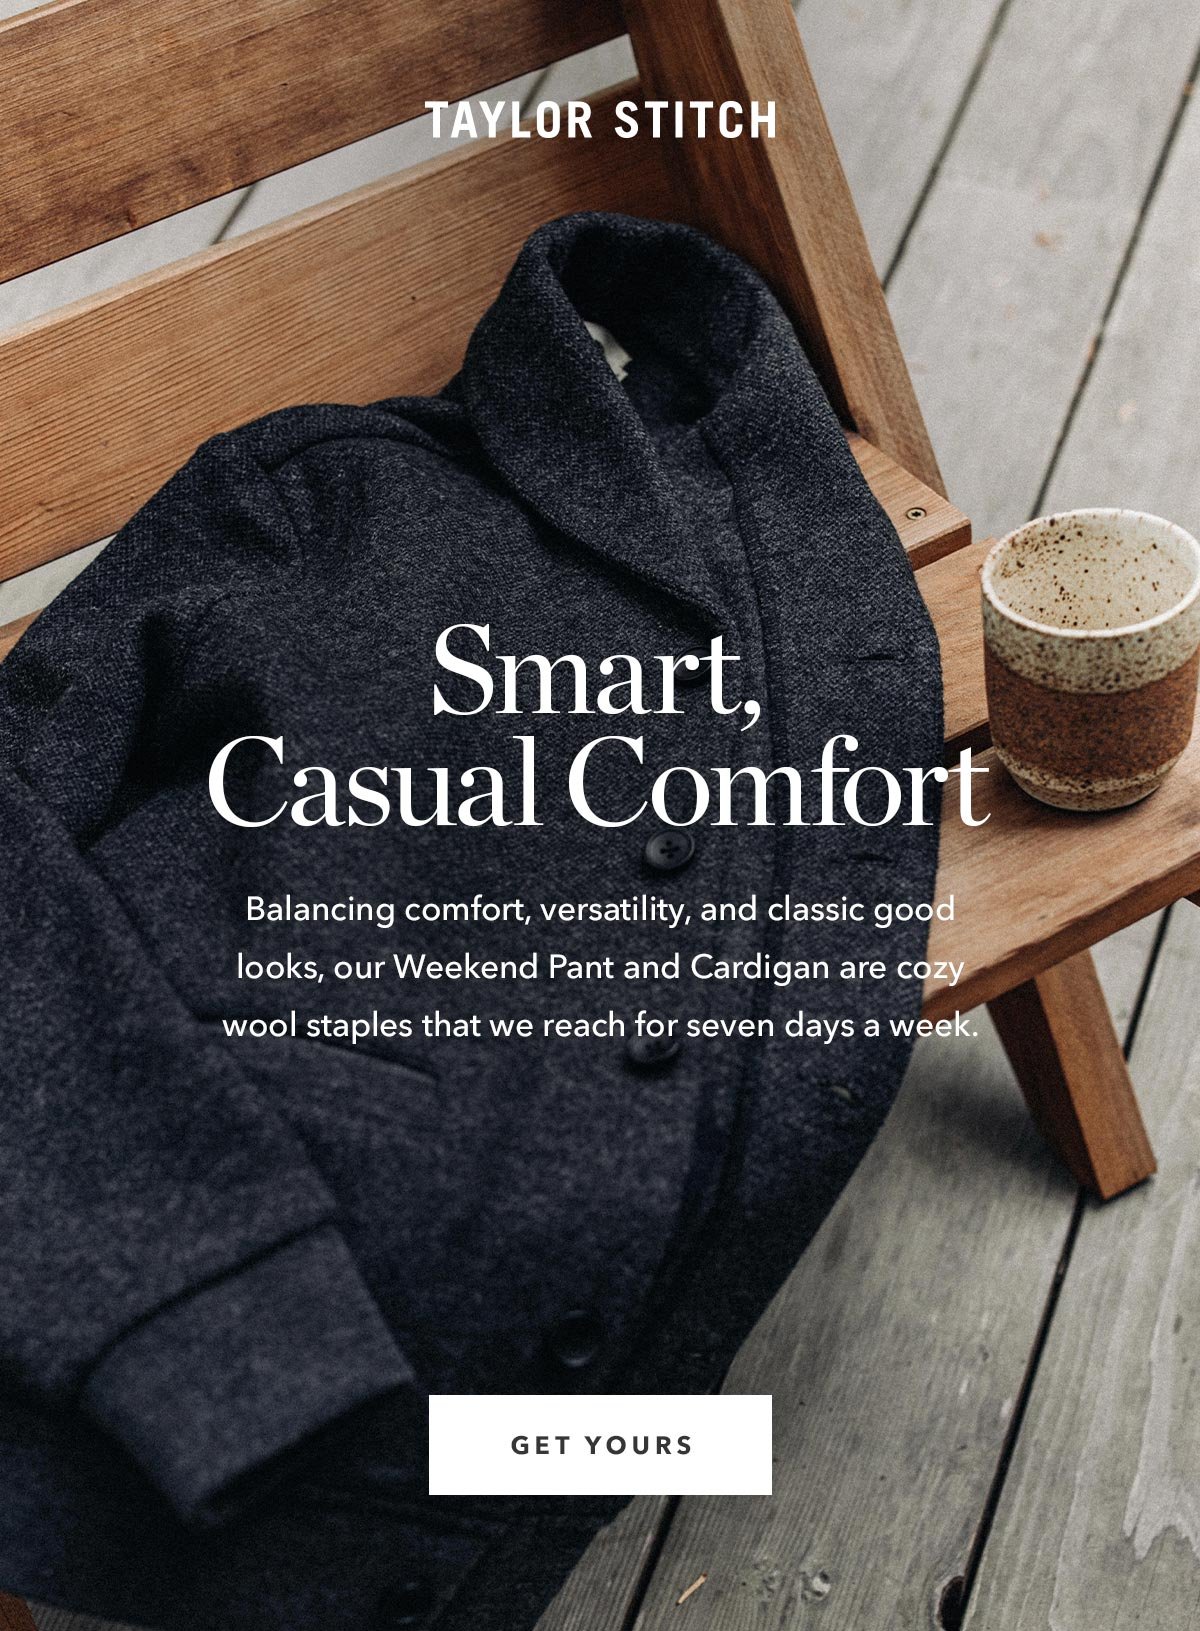 Smart, Casual Comfort: Balancing comfort, versatility, and classic good looks, our Weekend Pant and Weekend Cardigan are cozy wool staples that we reach for seven days a week.